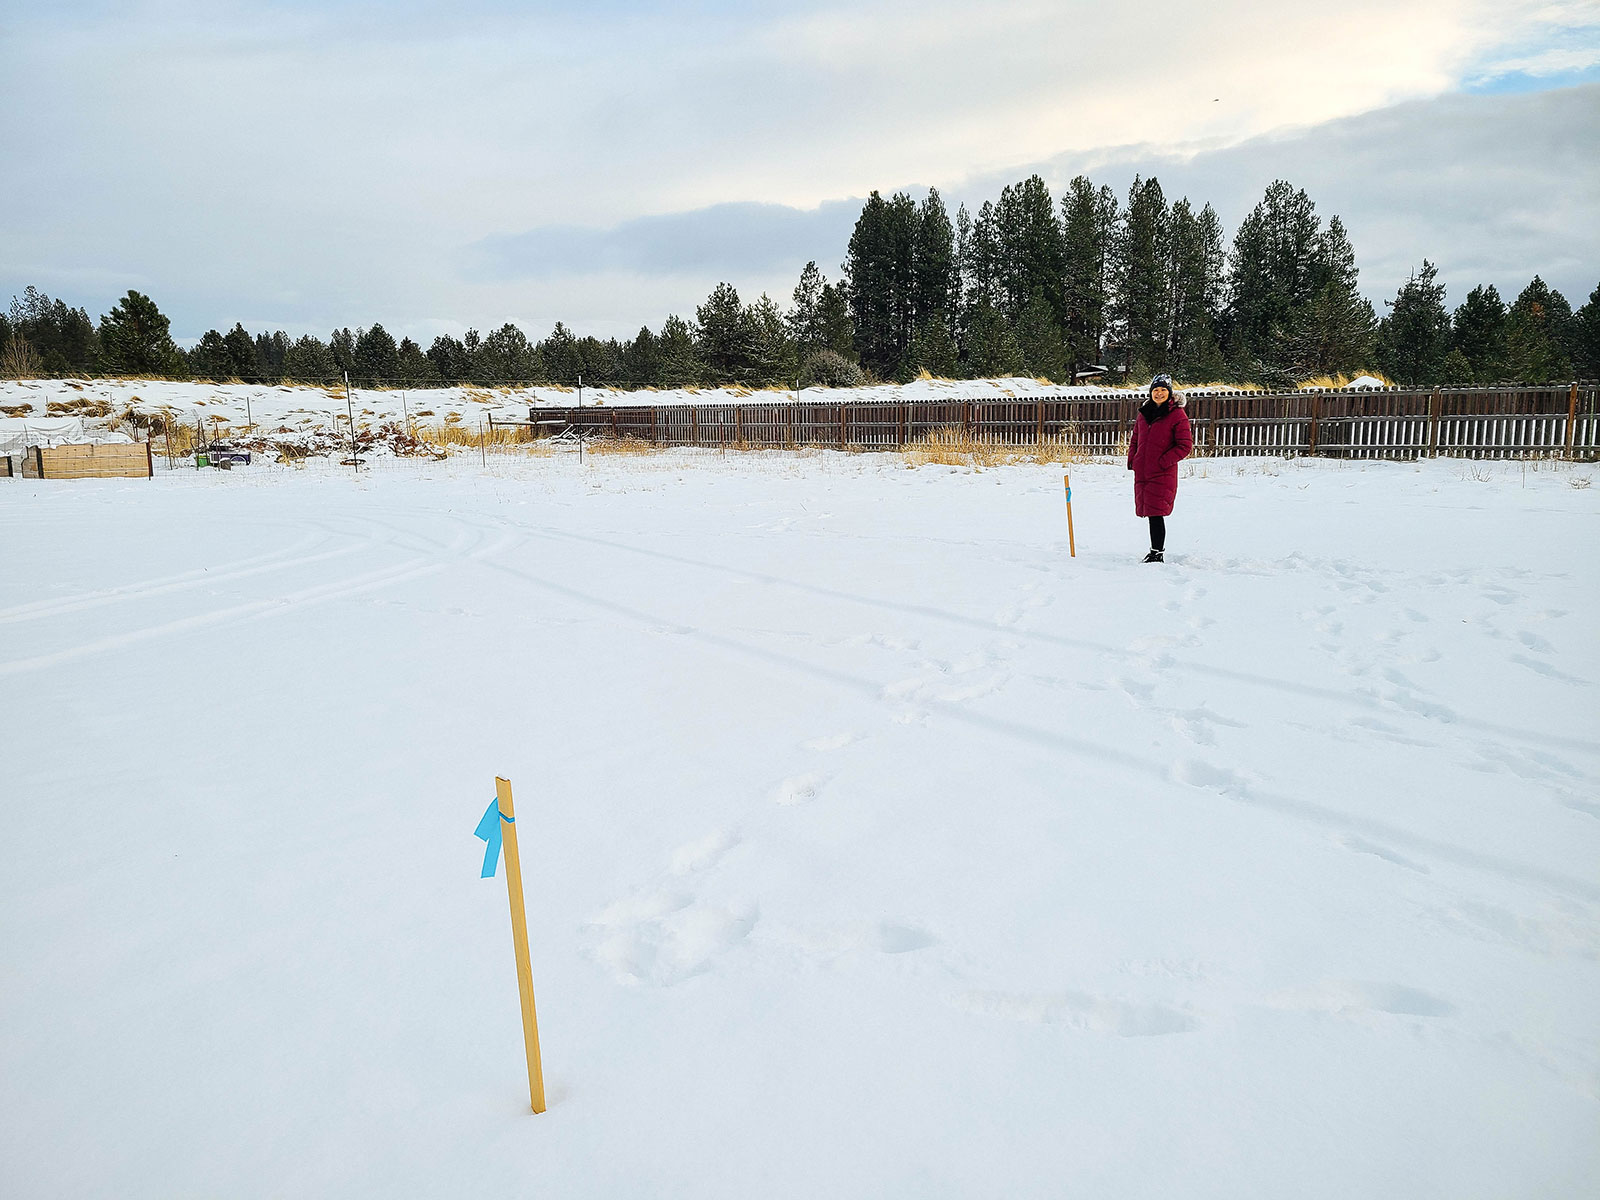 Woman in red winter coat standing next to a survey stake in a snowy yard